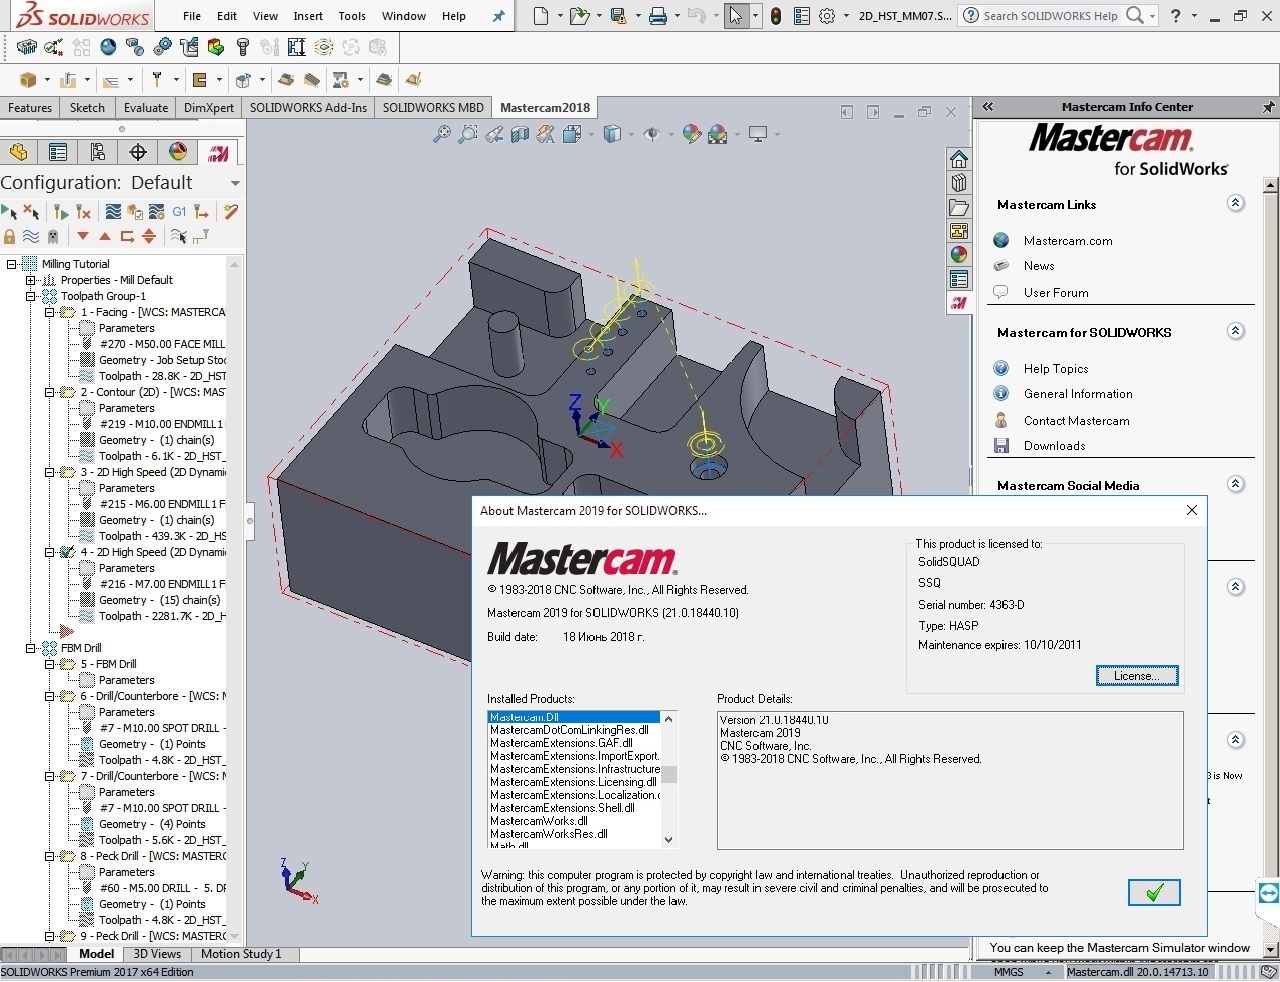 Machining with update 1 Mastercam2019 for SolidWorks